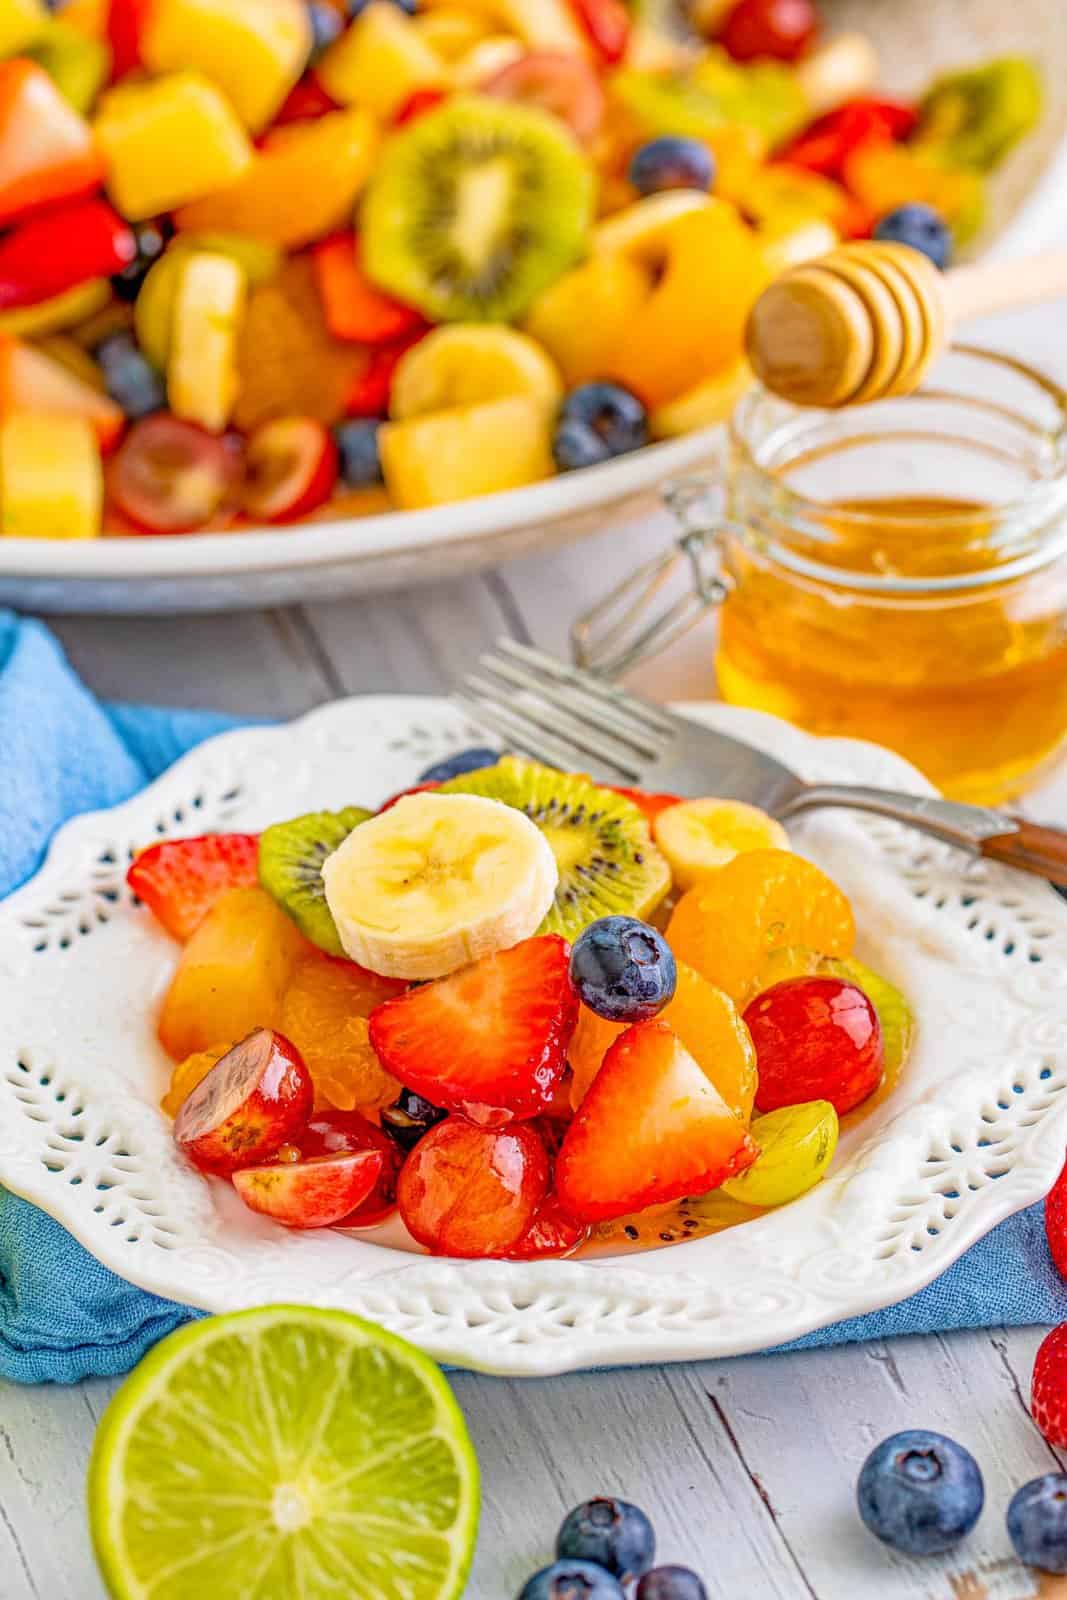 Plate of Fruit Salad with honey and large bowl of salad in background.